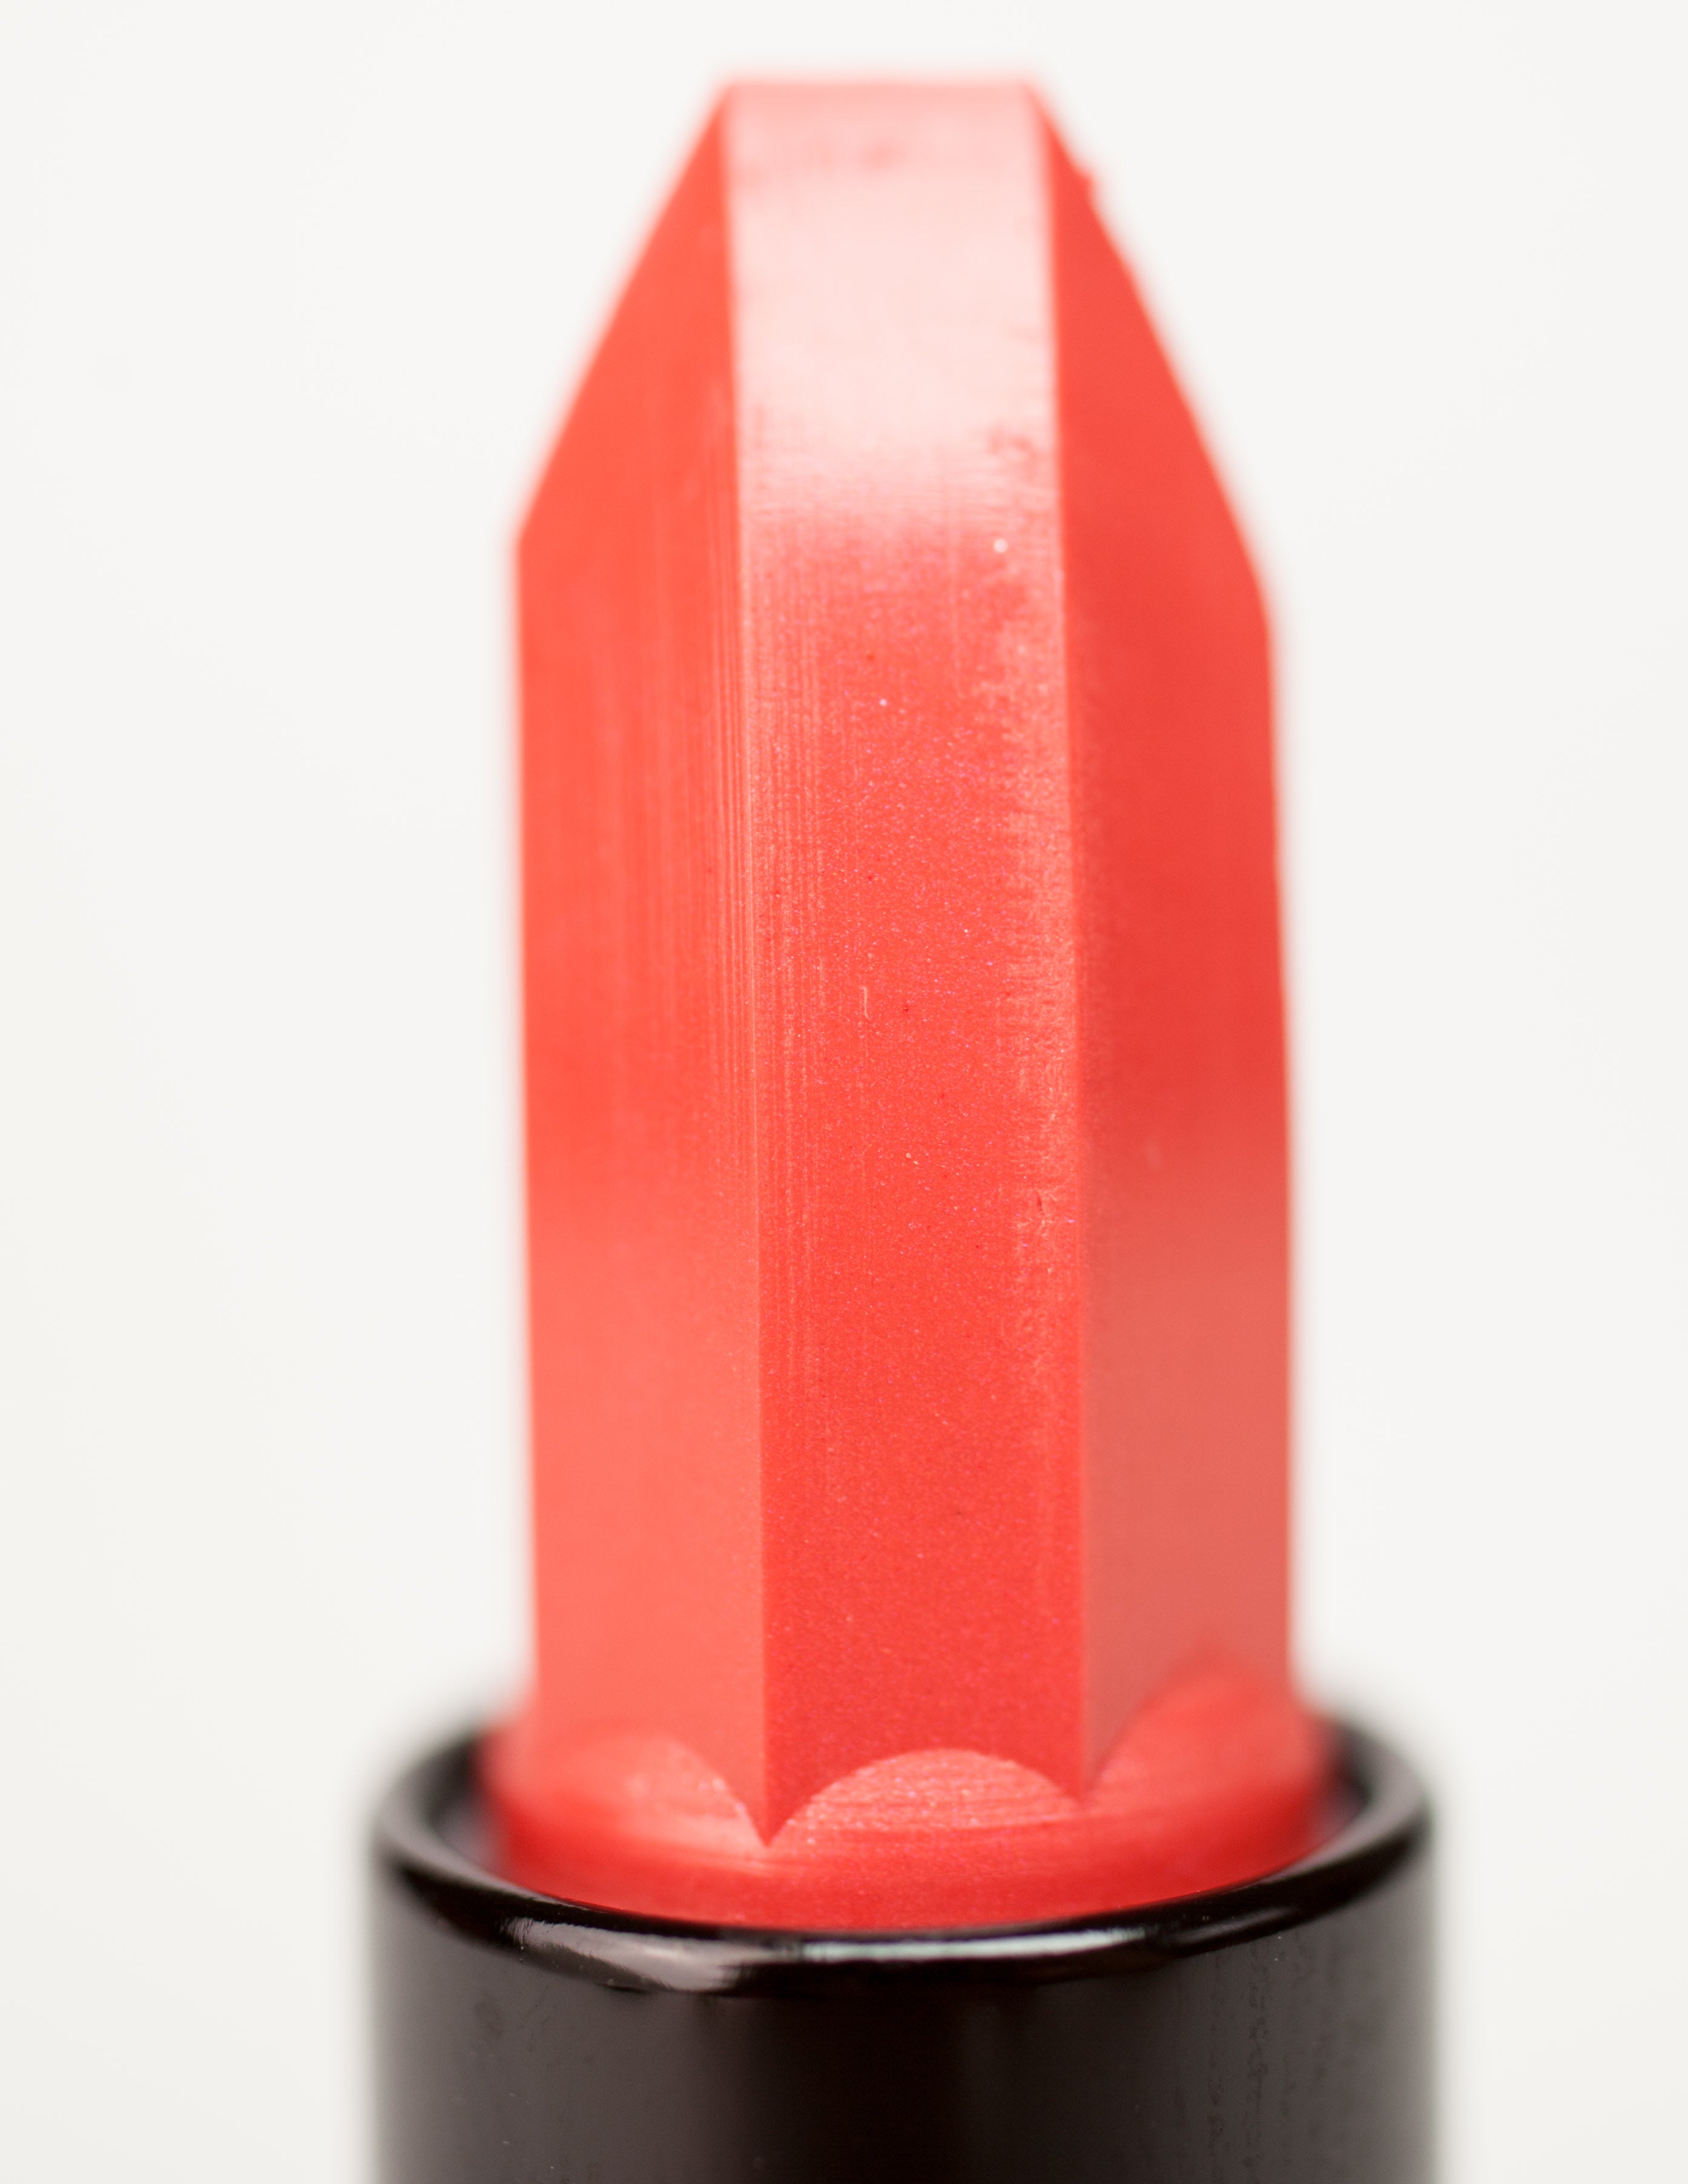 LTW Devotion Muted Coral Bridal Lipstick Color Swatch